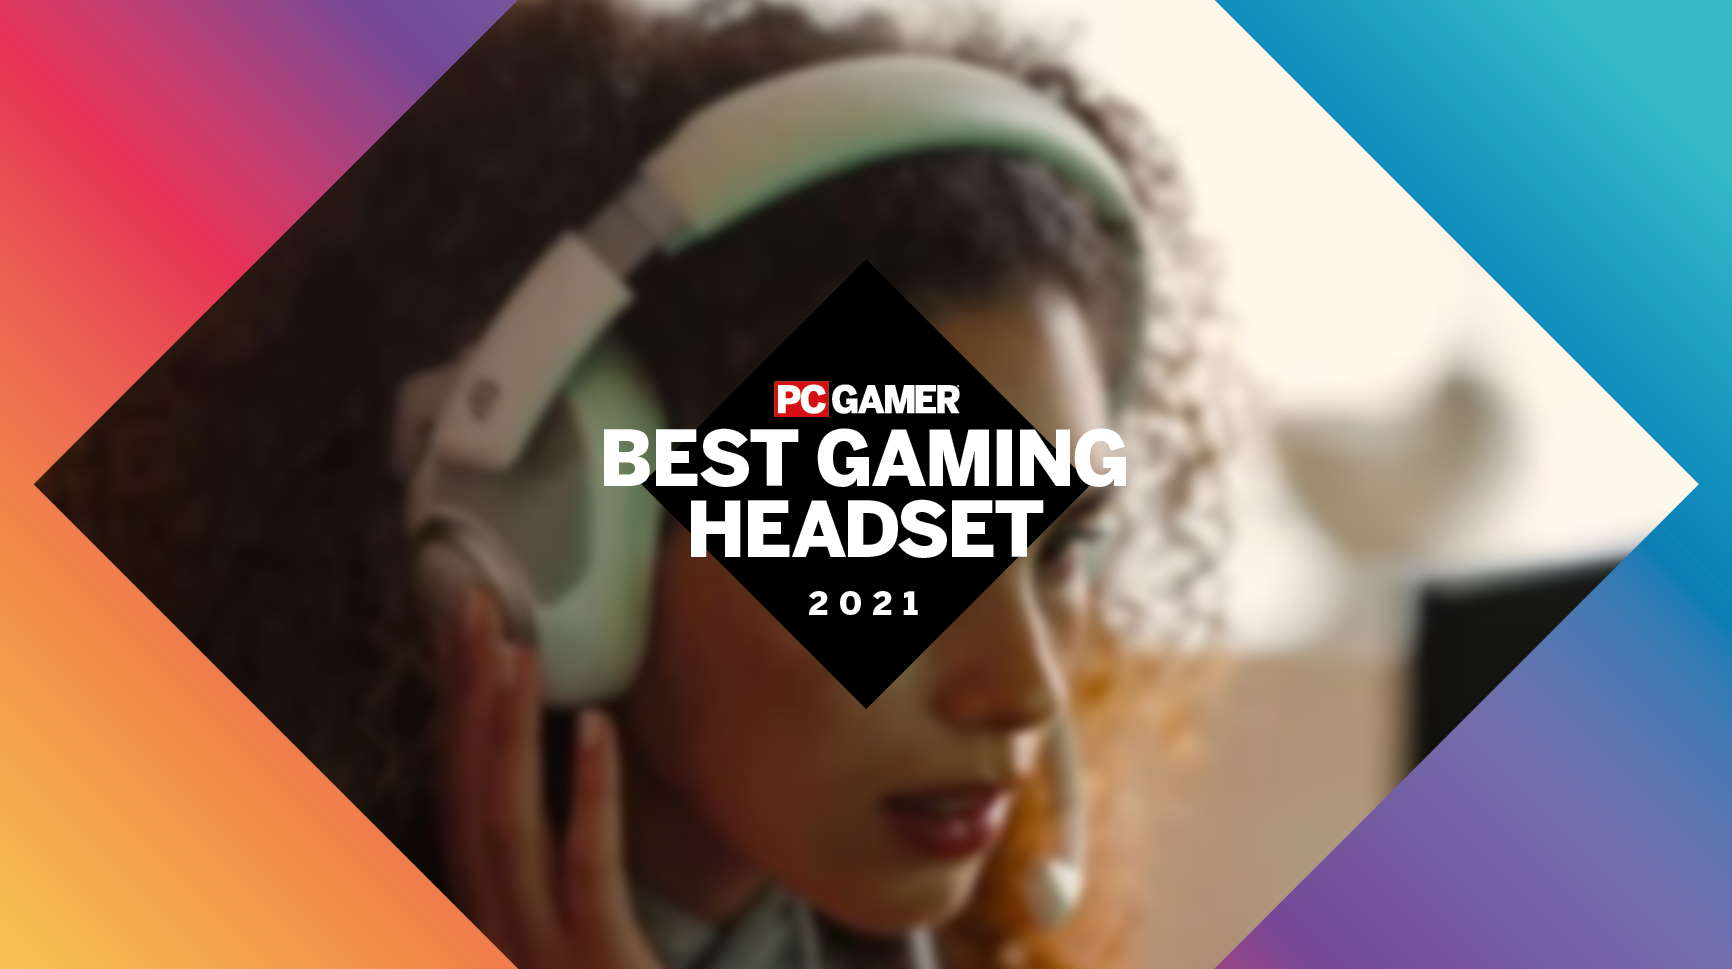 PC Gamer Hardware Awards: What Is The Best Gaming Headset Of 2021? thumbnail